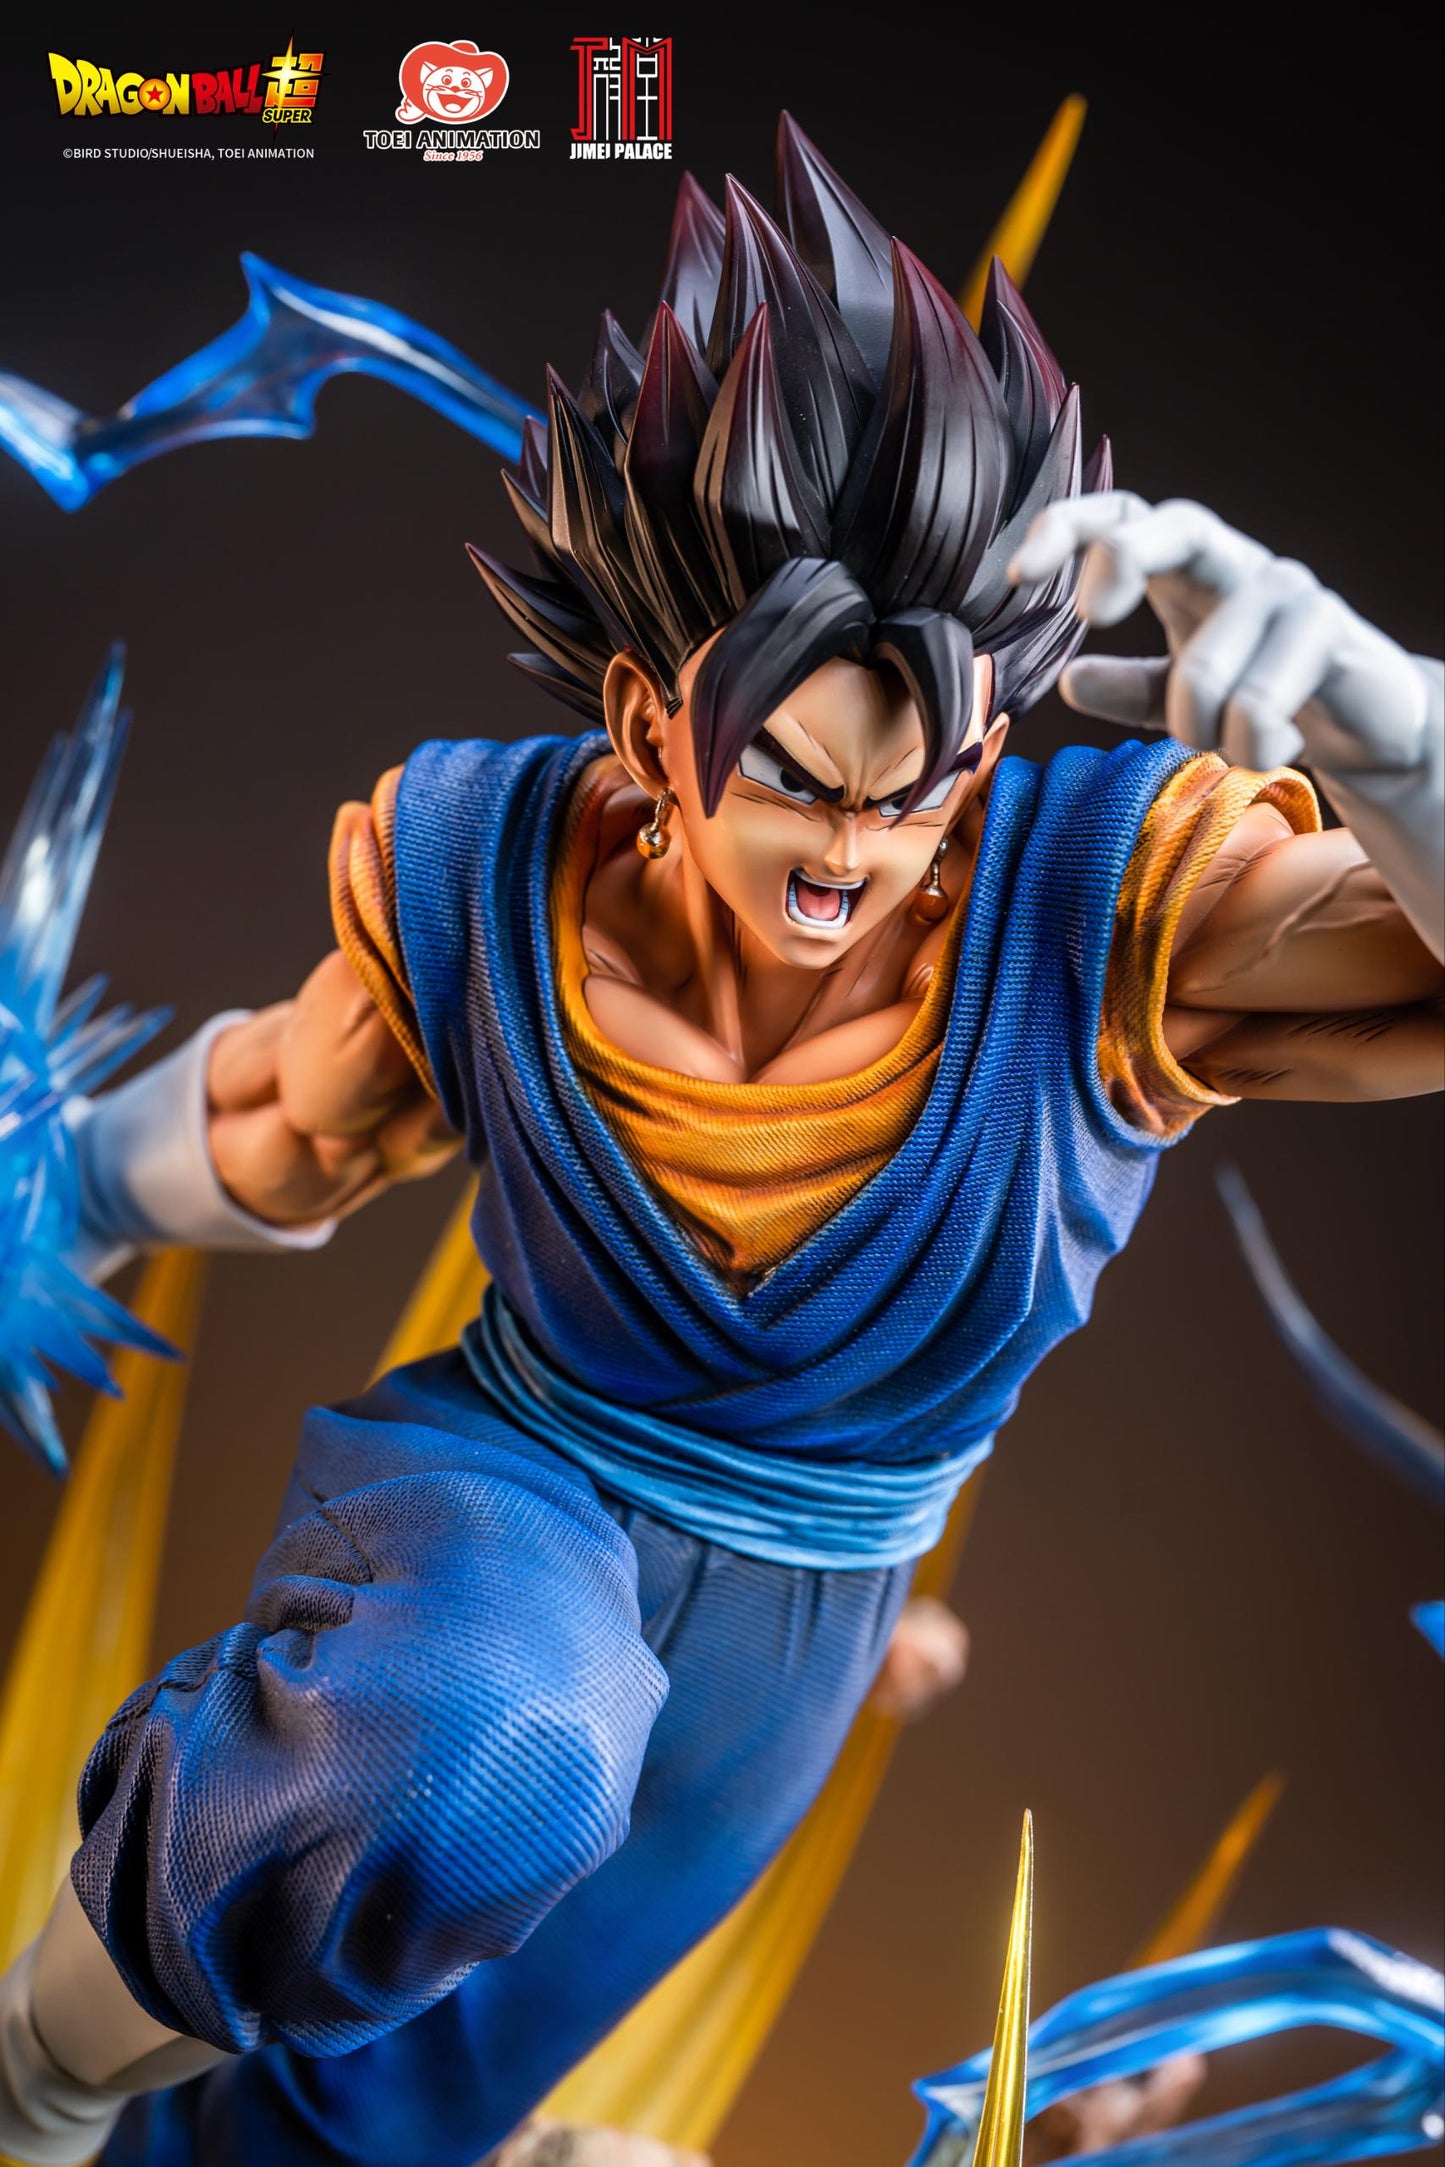 JIMEI PALACE STUDIO – DRAGON BALL SUPER: VEGETTO (LICENSED) [SOLD OUT]